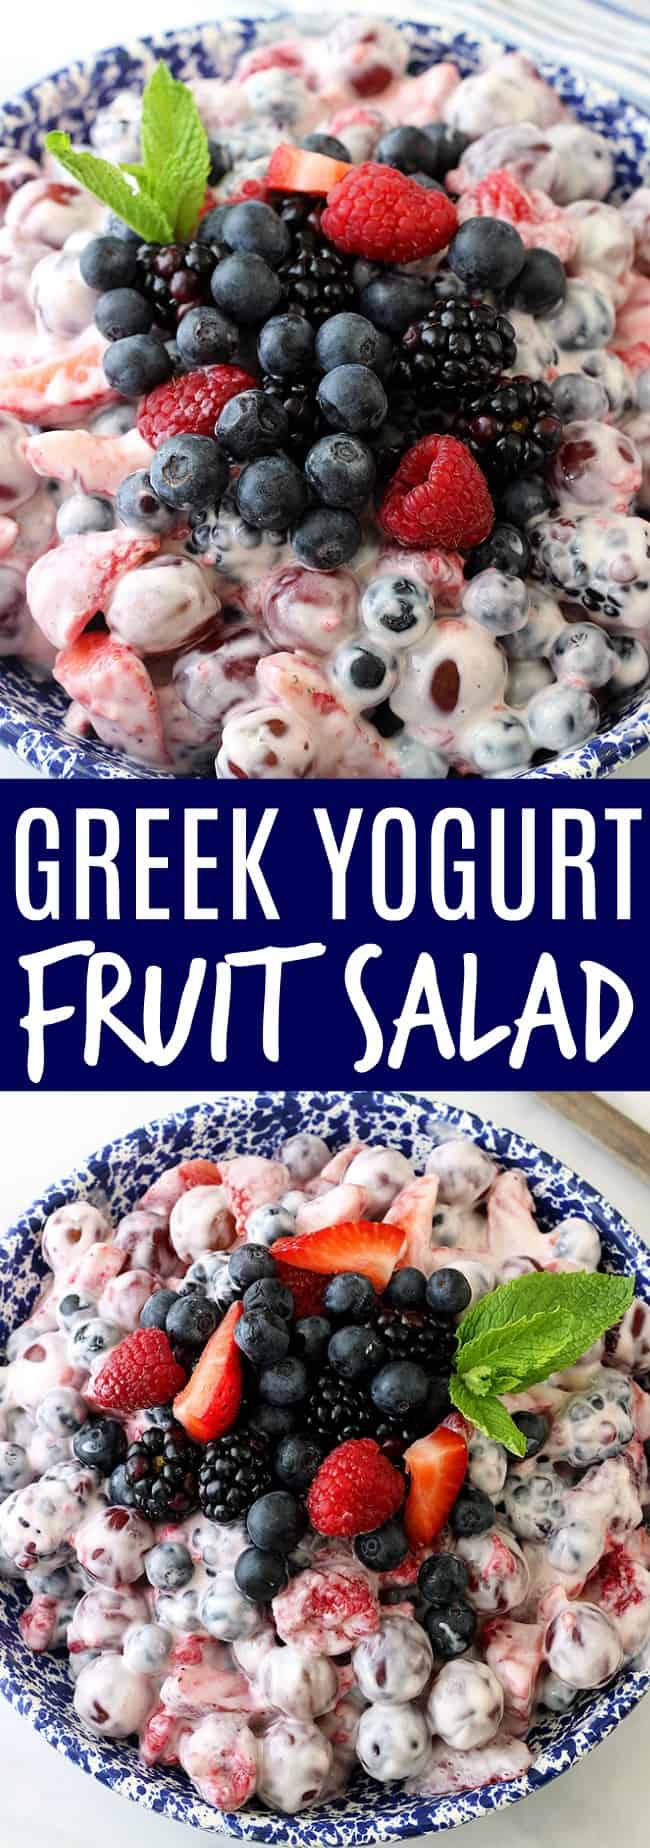 A closeup of fruit salad with greek yogurt in a blue and white bowl